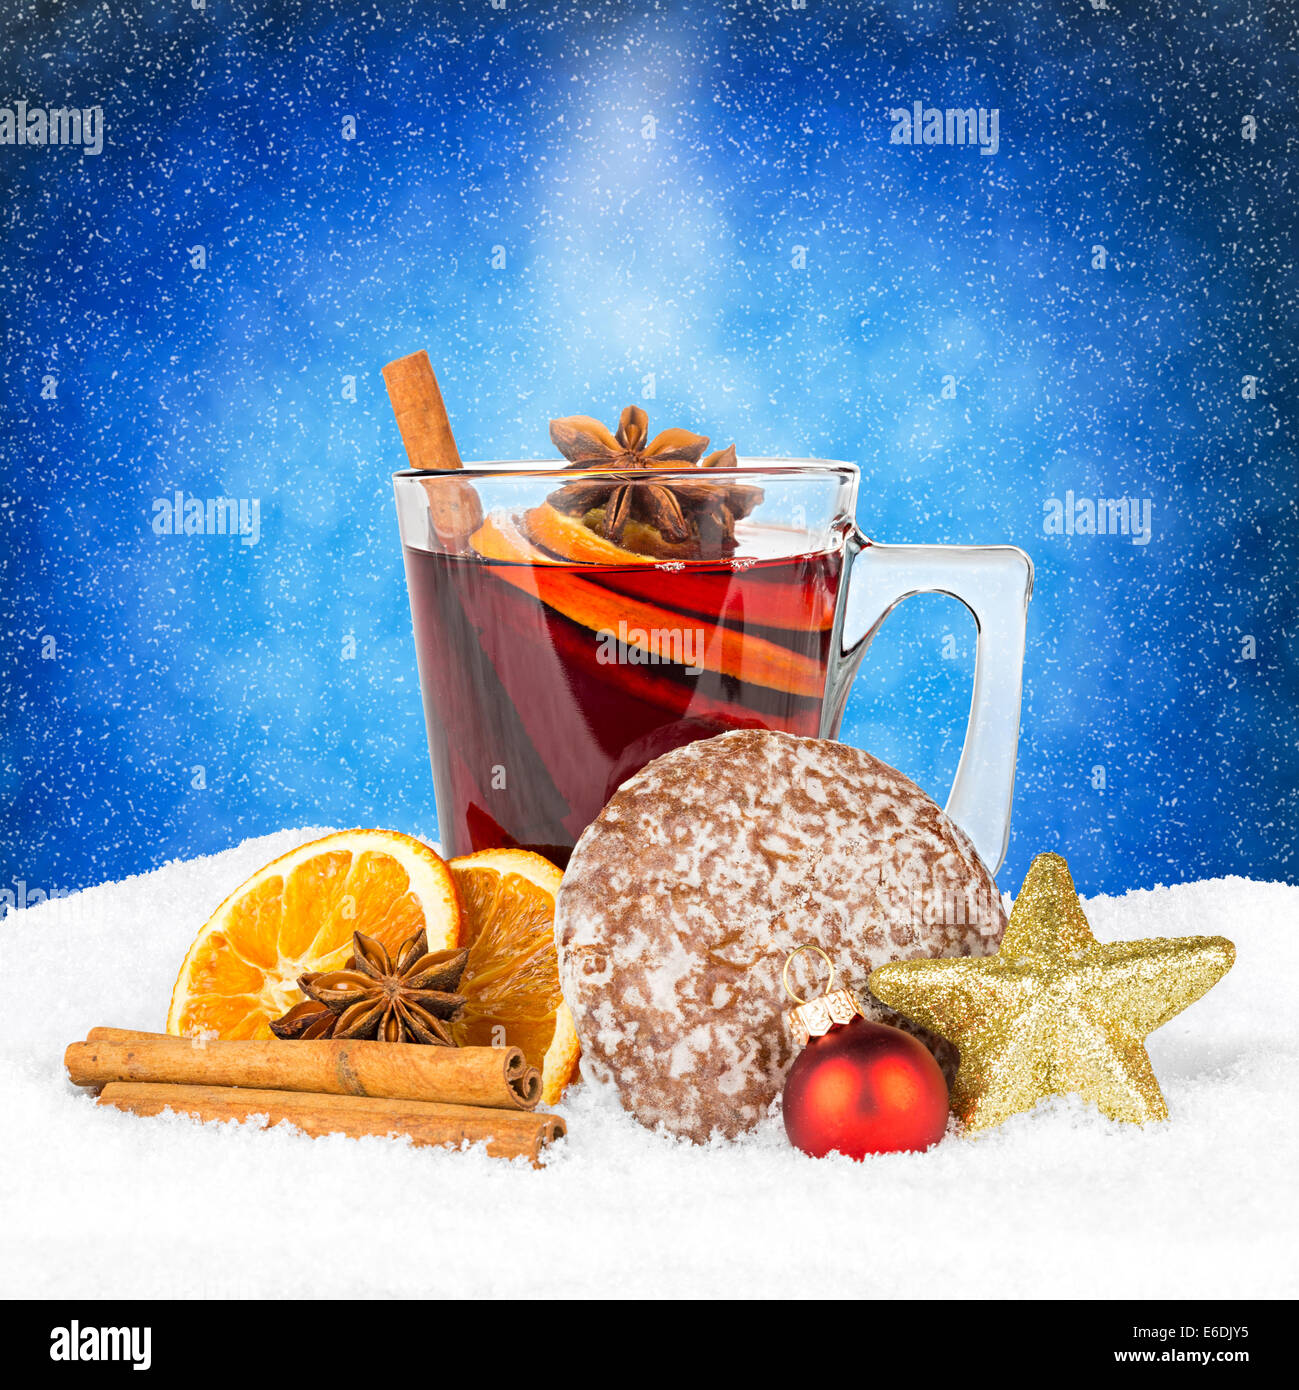 hot spiced wine in front of night sky Stock Photo